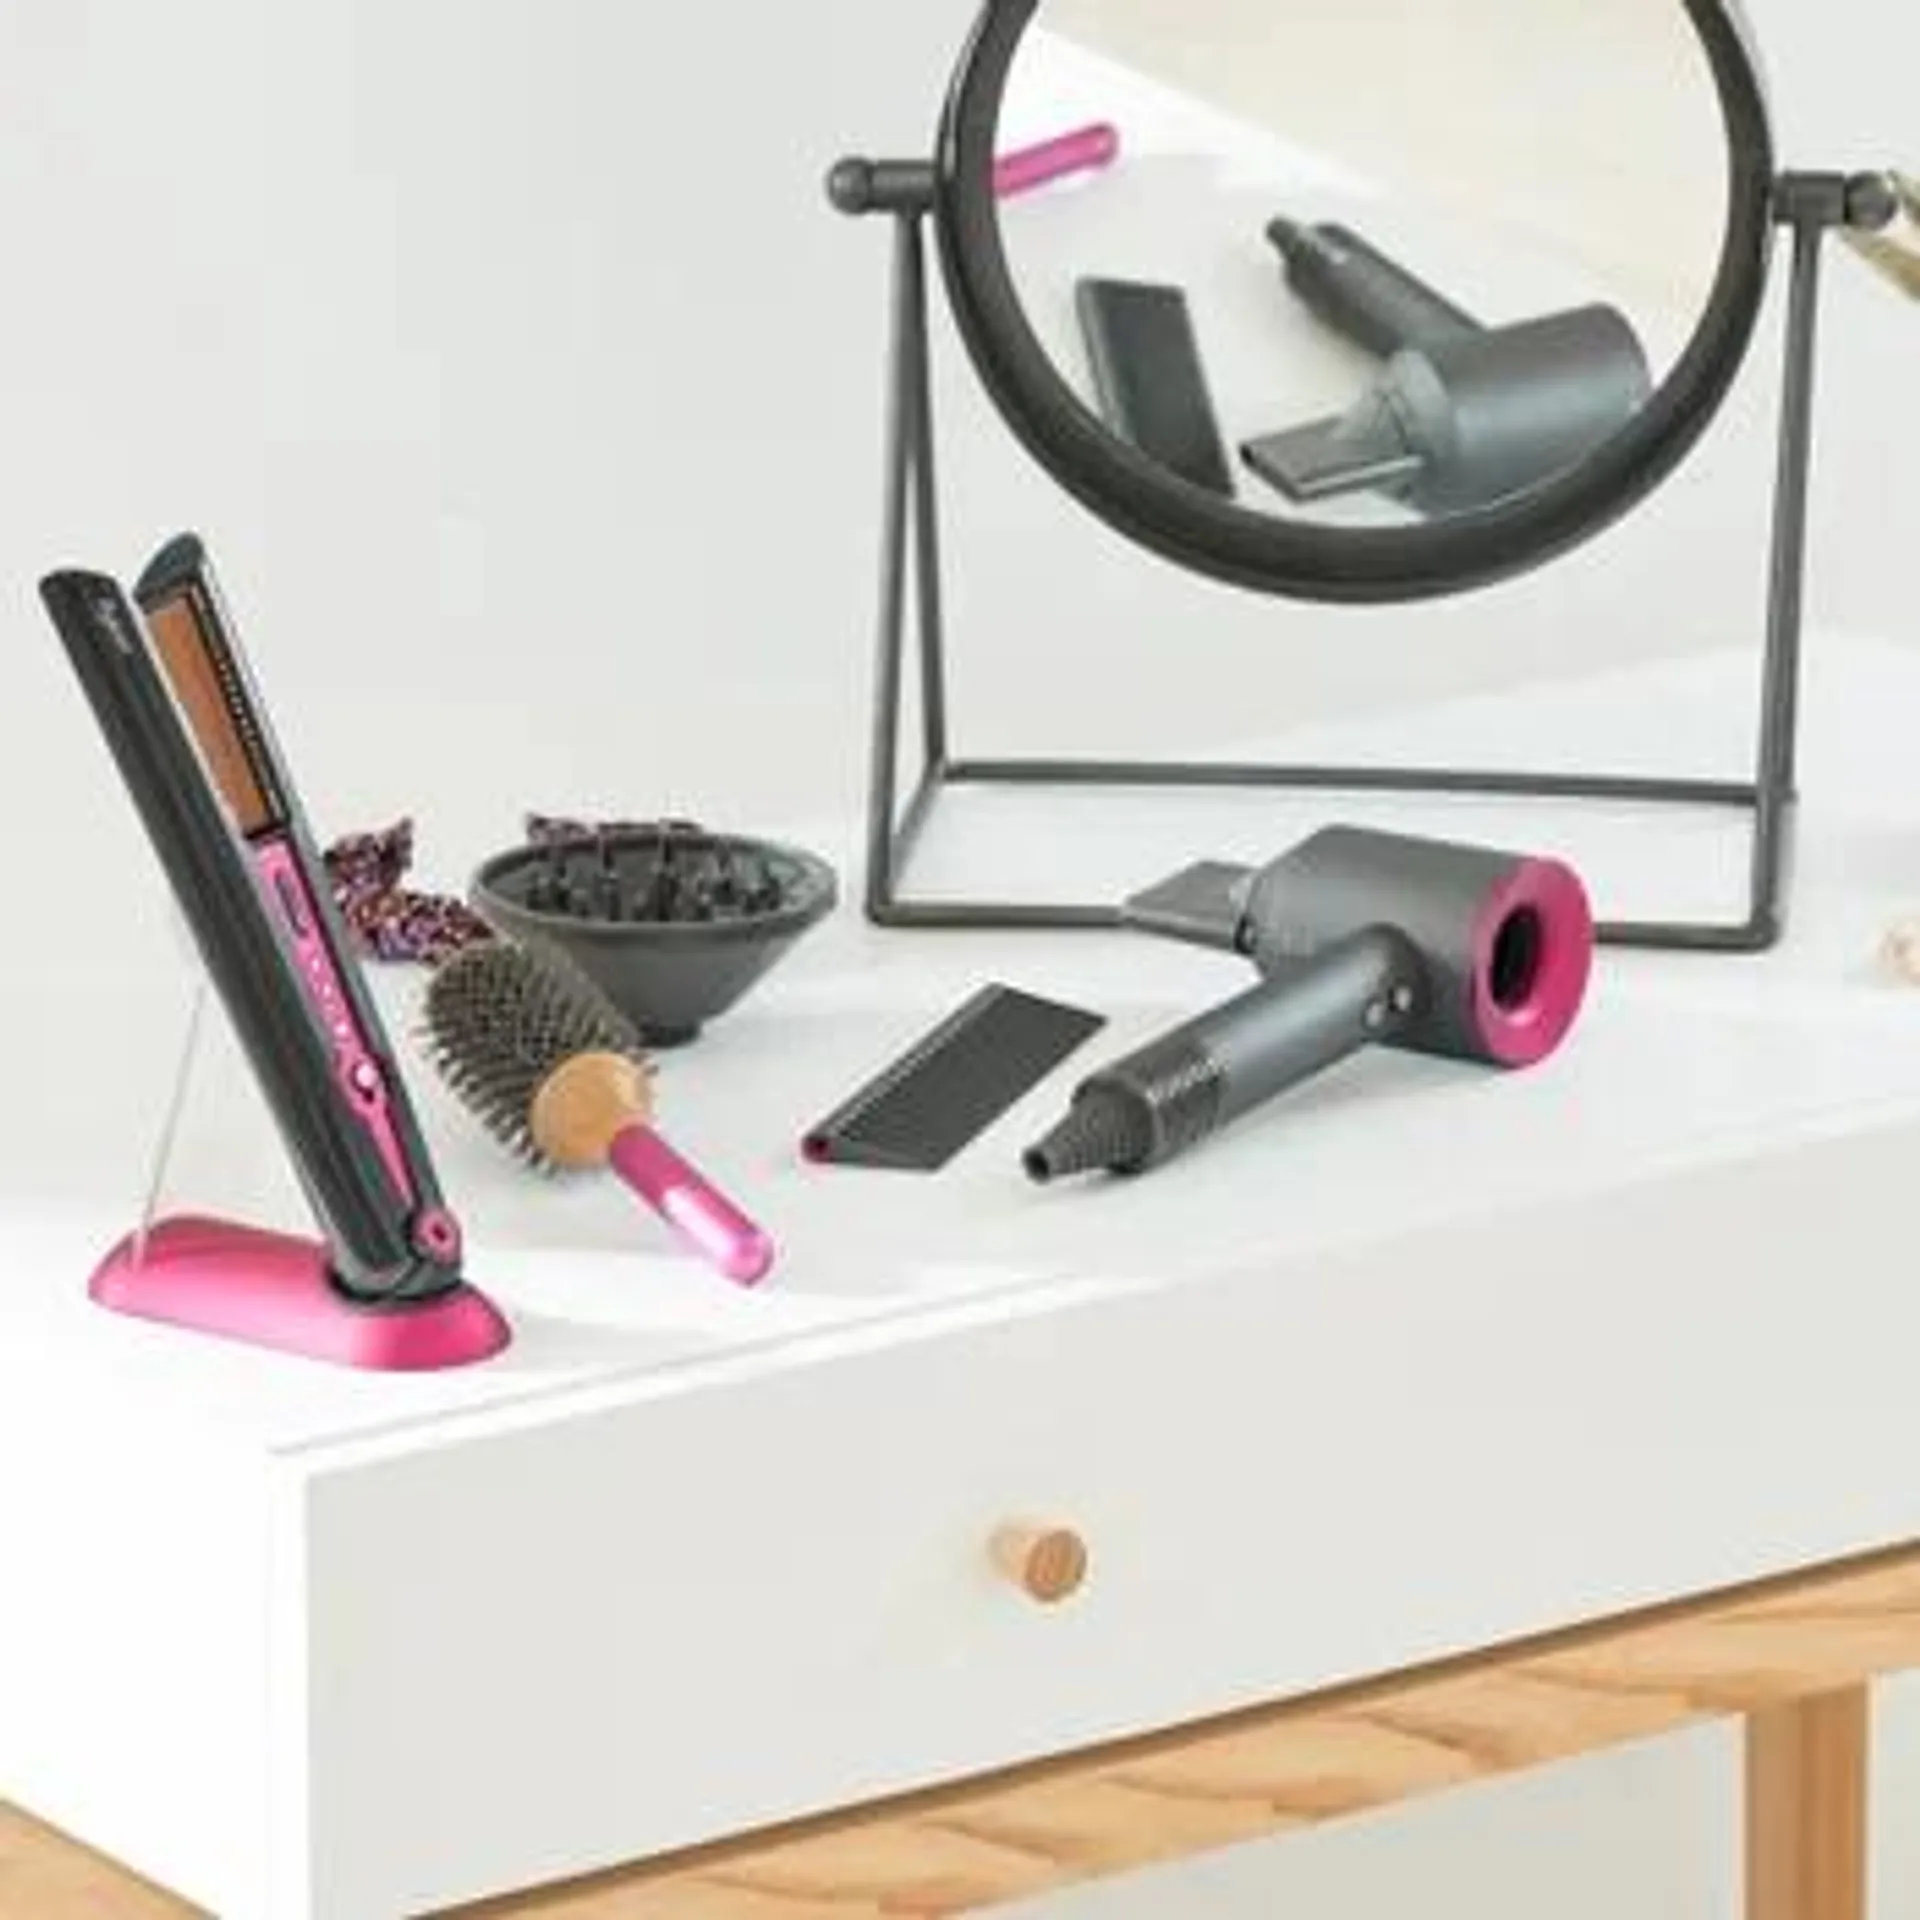 Dyson Supersonic & Corrale - Toy Hairdryer & Straighteners Set